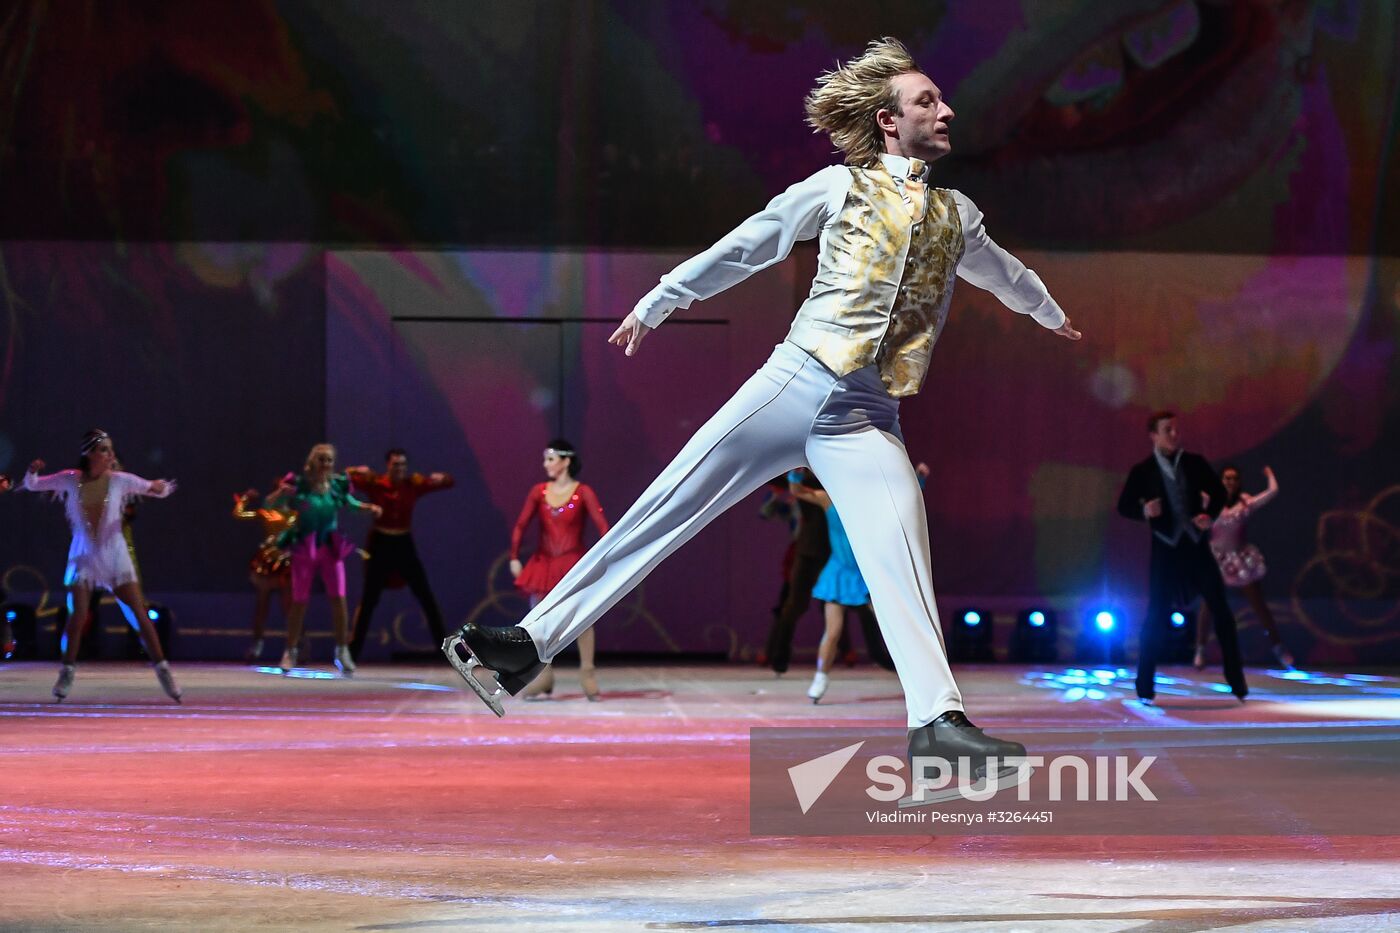 Nutcracker 2 ice show in Moscow